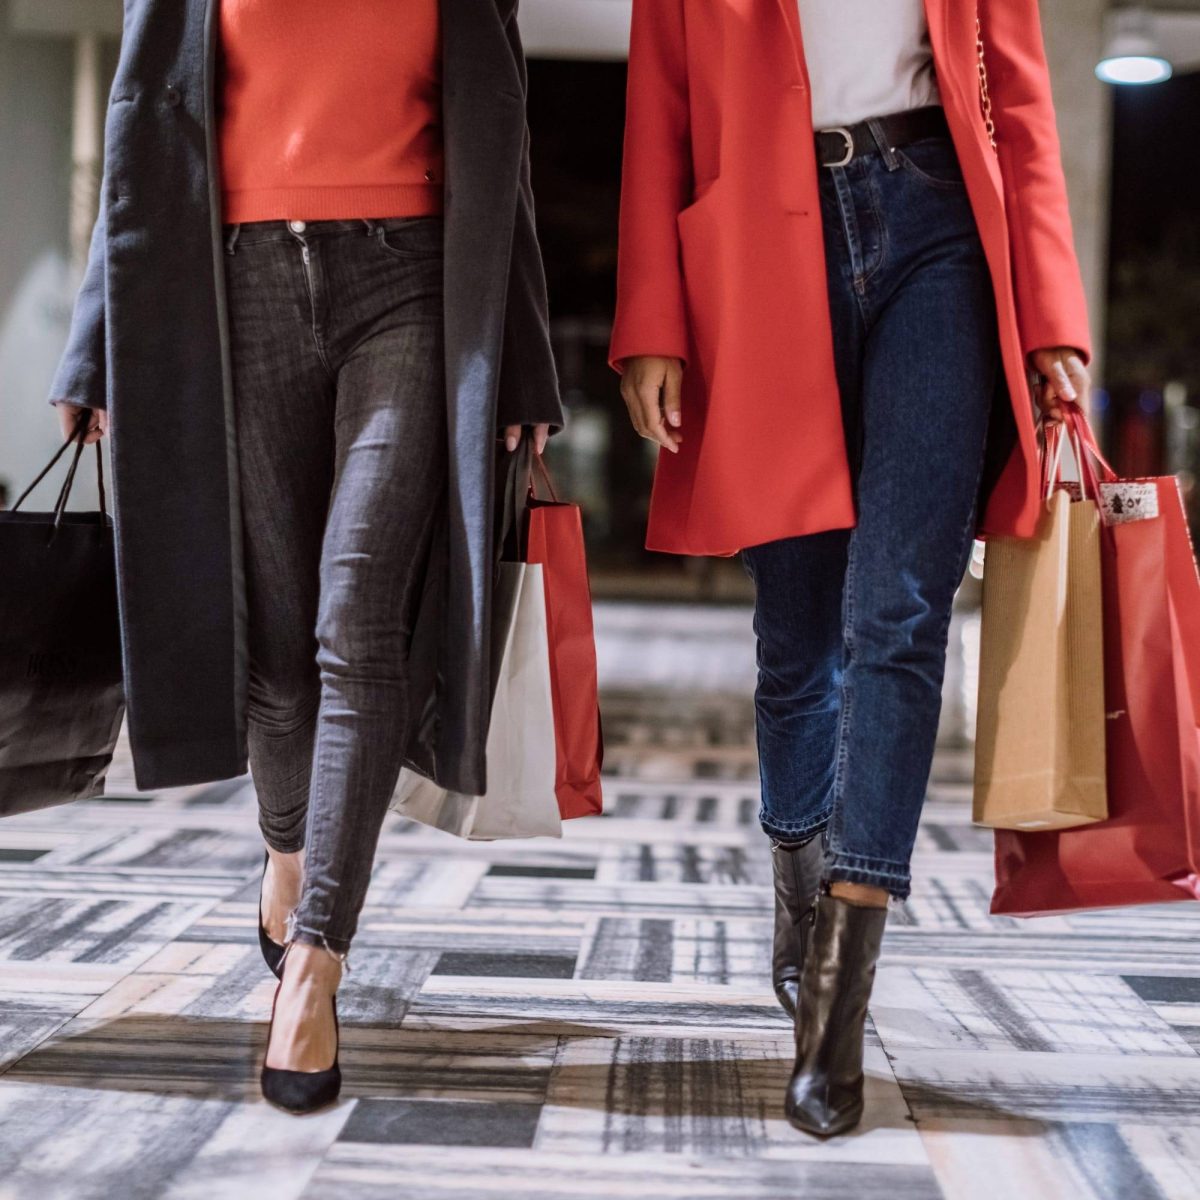 Women shopping at Richmond Centre mall stores